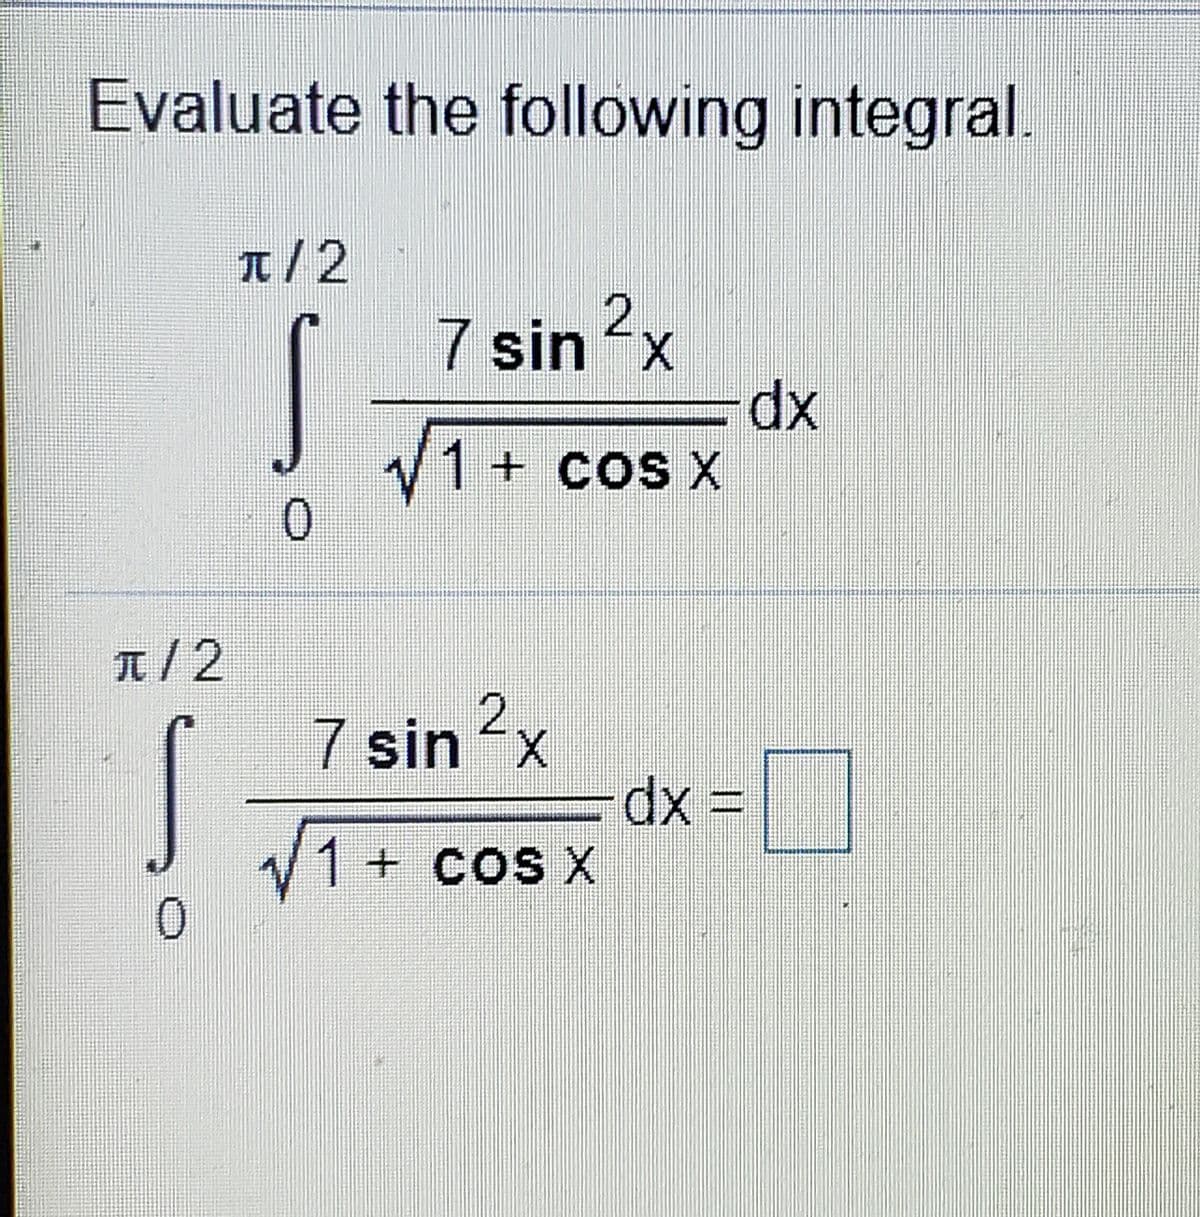 Evaluate the following integral.
T/2
7 sinx
xp
V1 + cos x
0.
+ COS
1/2
7 sinx
dx =|
+ COS X
